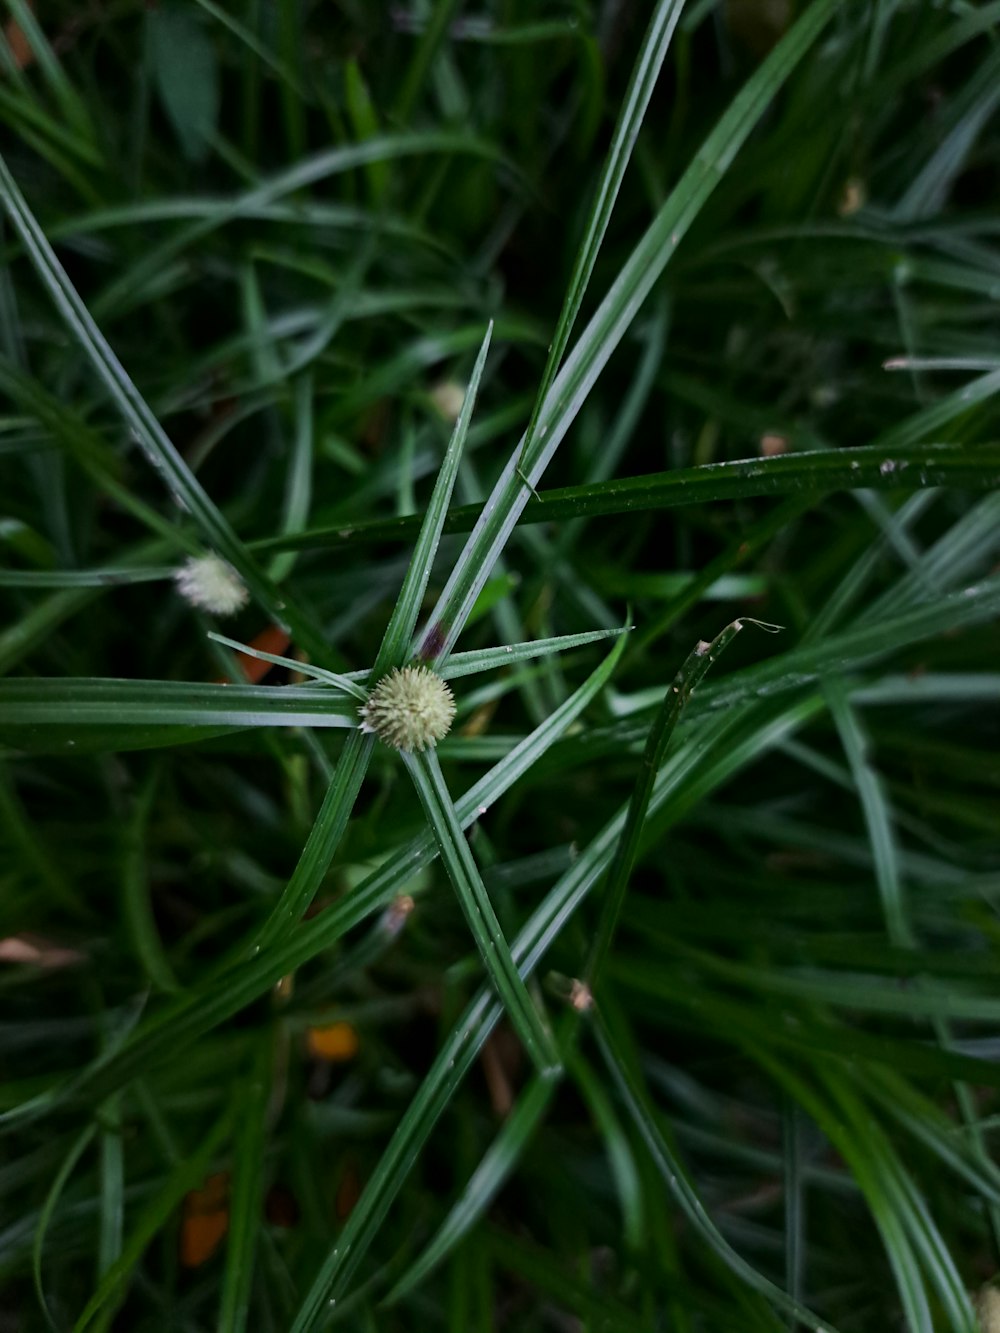 a close up of a green grass with small white flowers